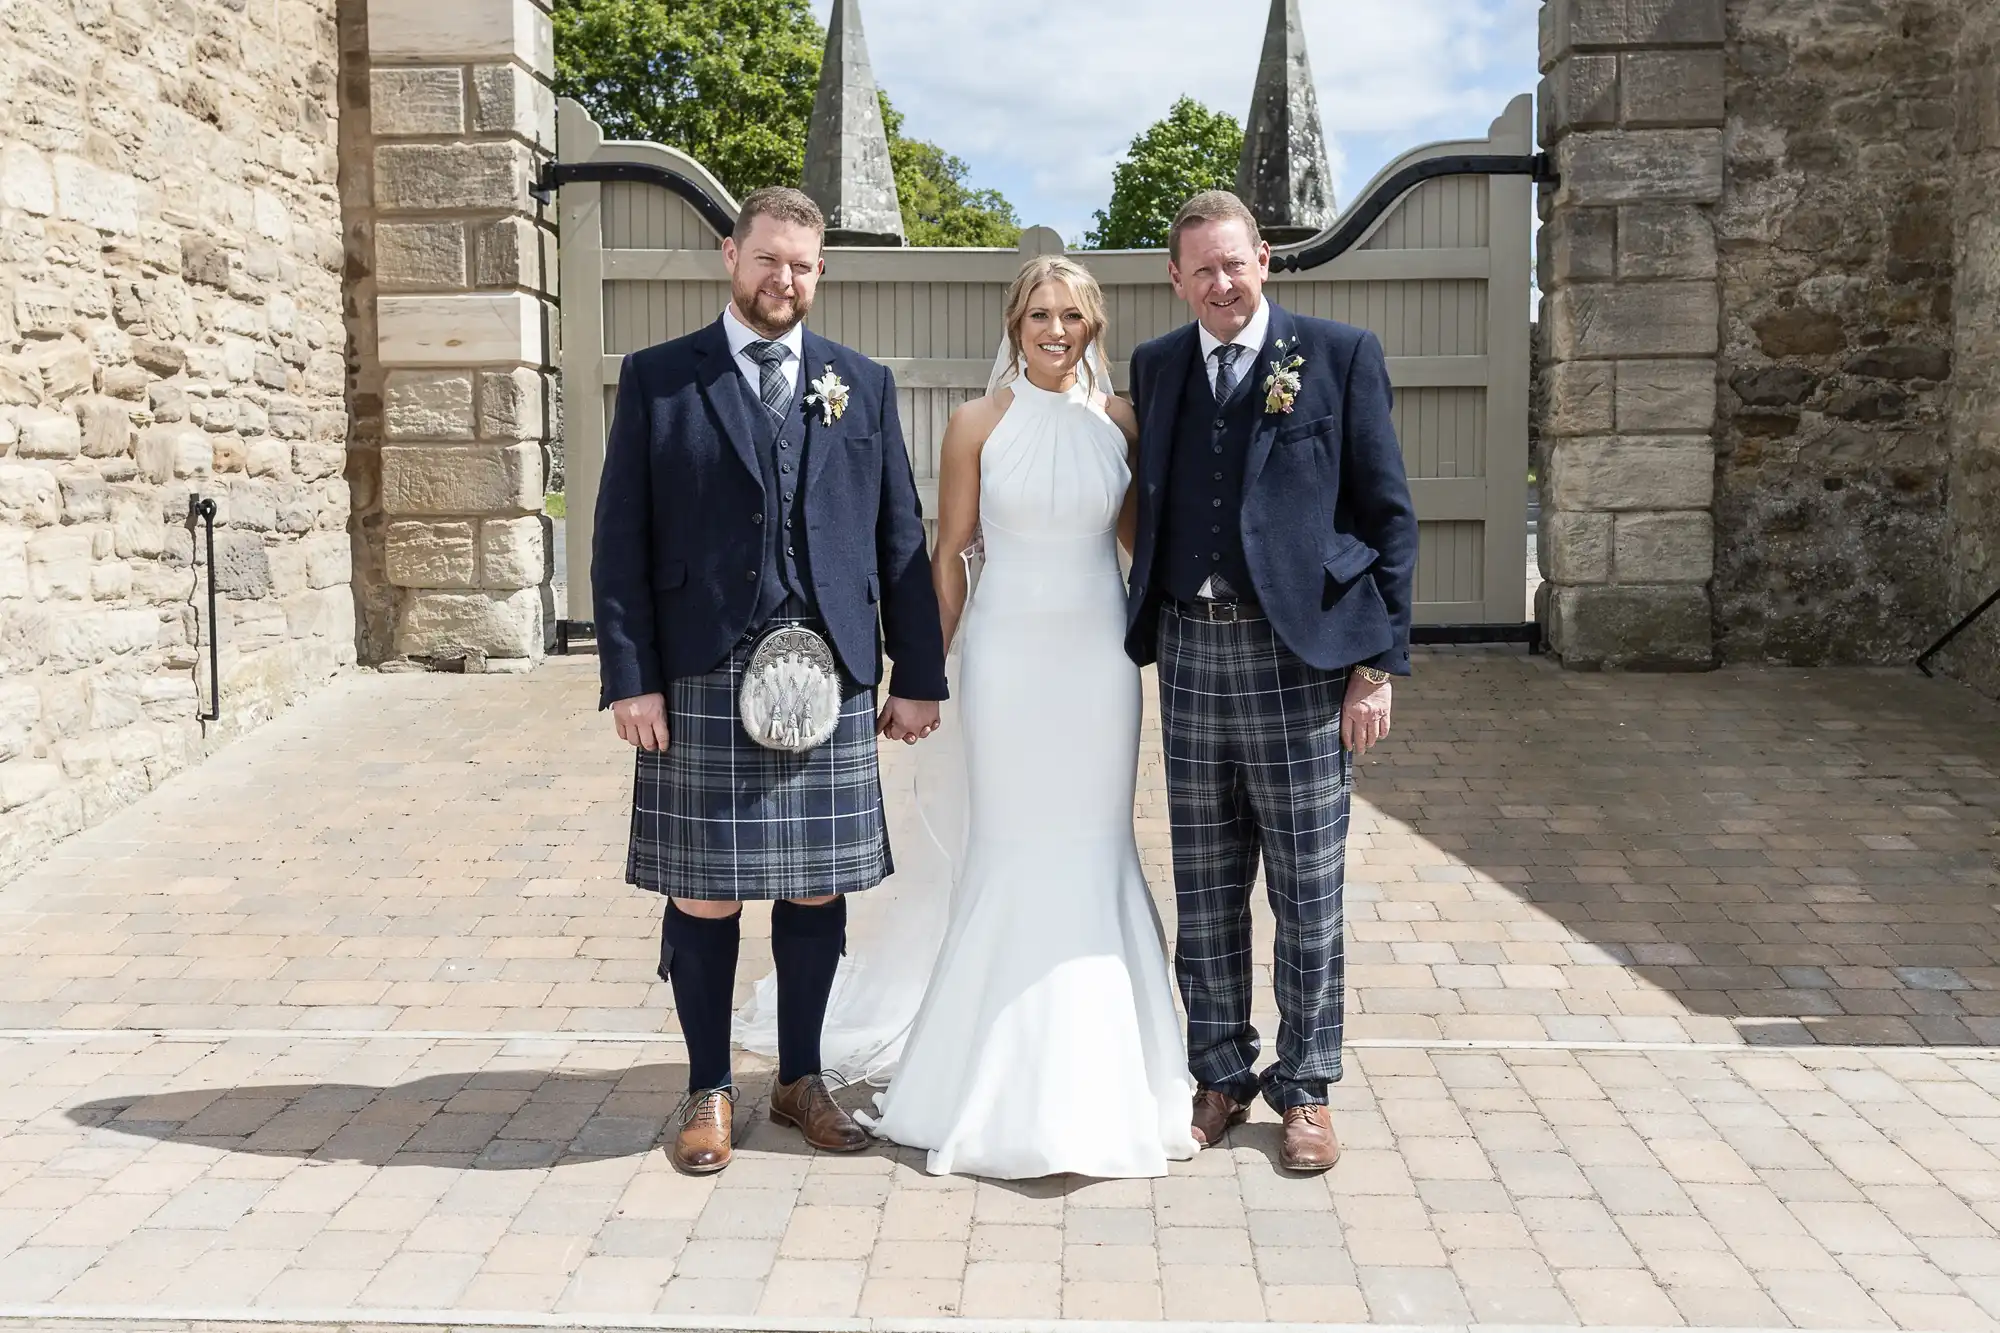 A bride in a white dress flanked by two men in traditional Scottish kilts and jackets, standing outside a stone building entrance.